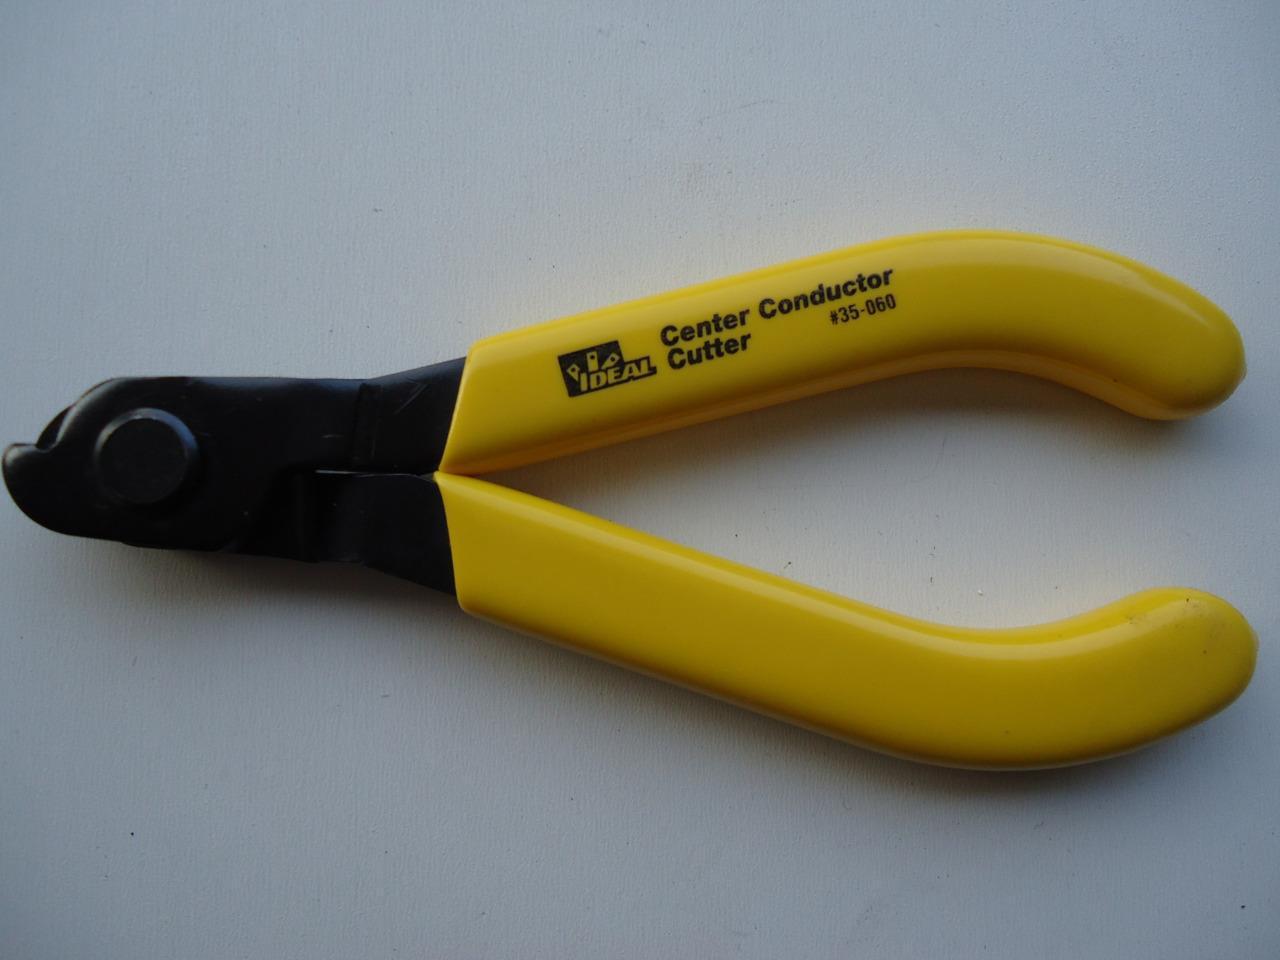 Ideal Center Conductor Cable Cutter #35-060